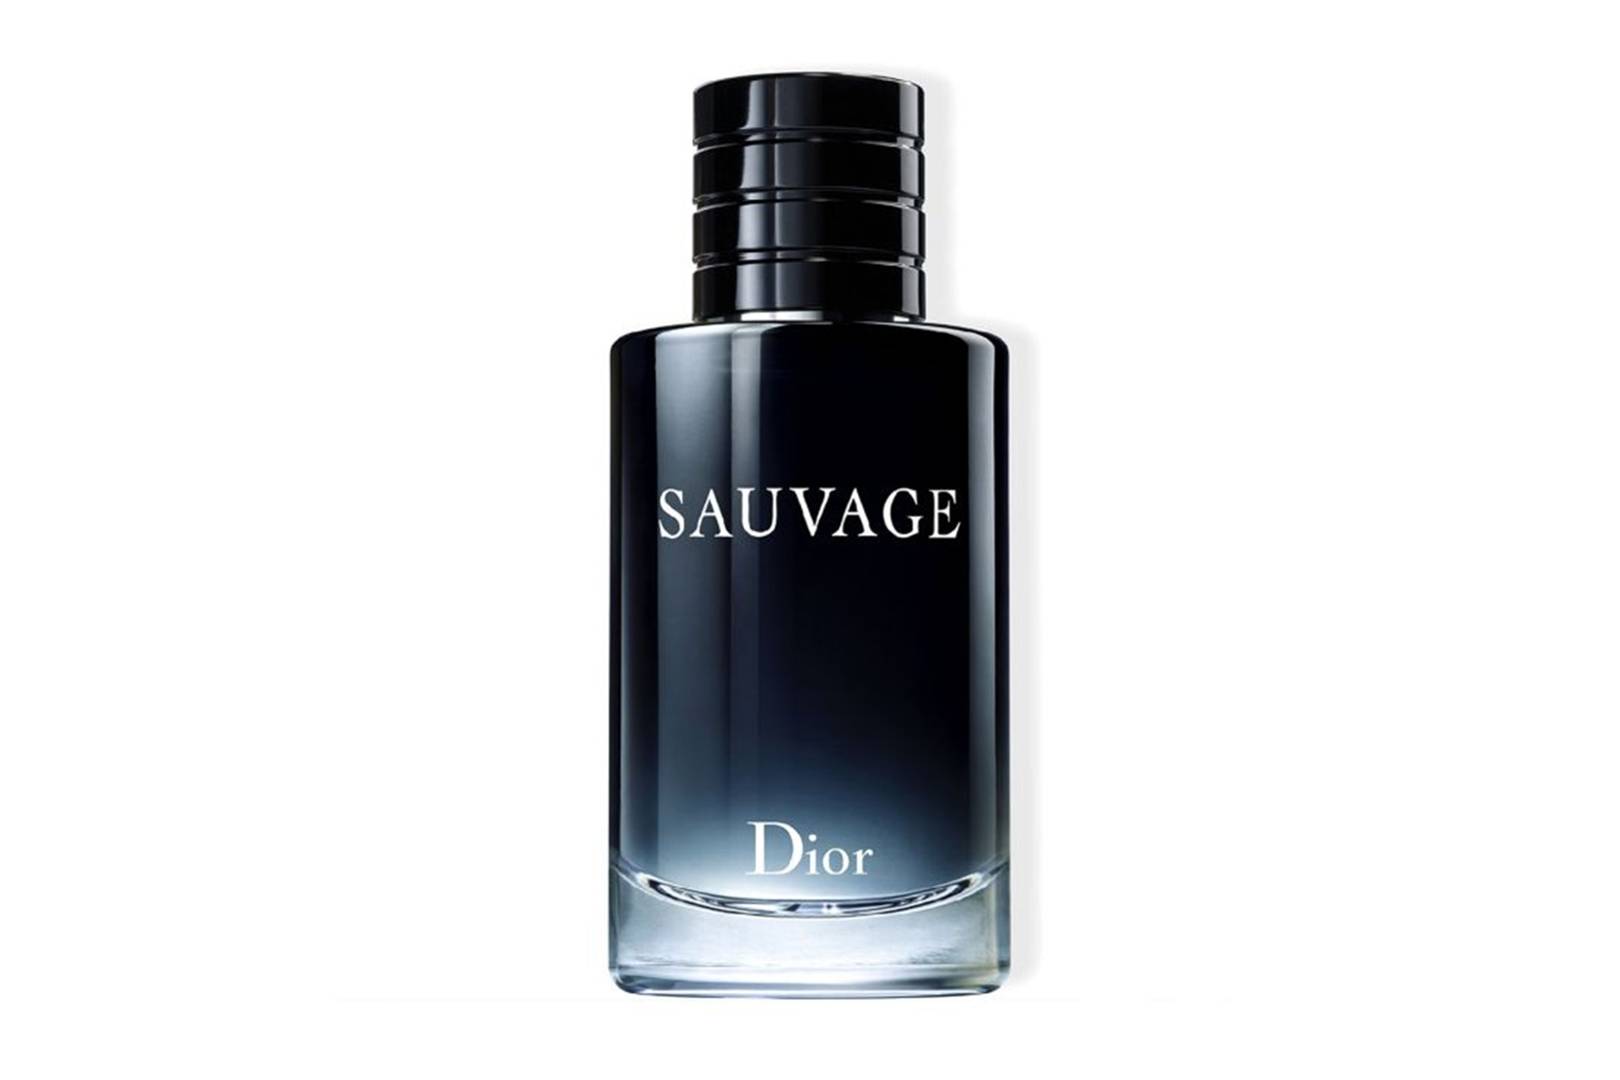 sauvage aftershave boots